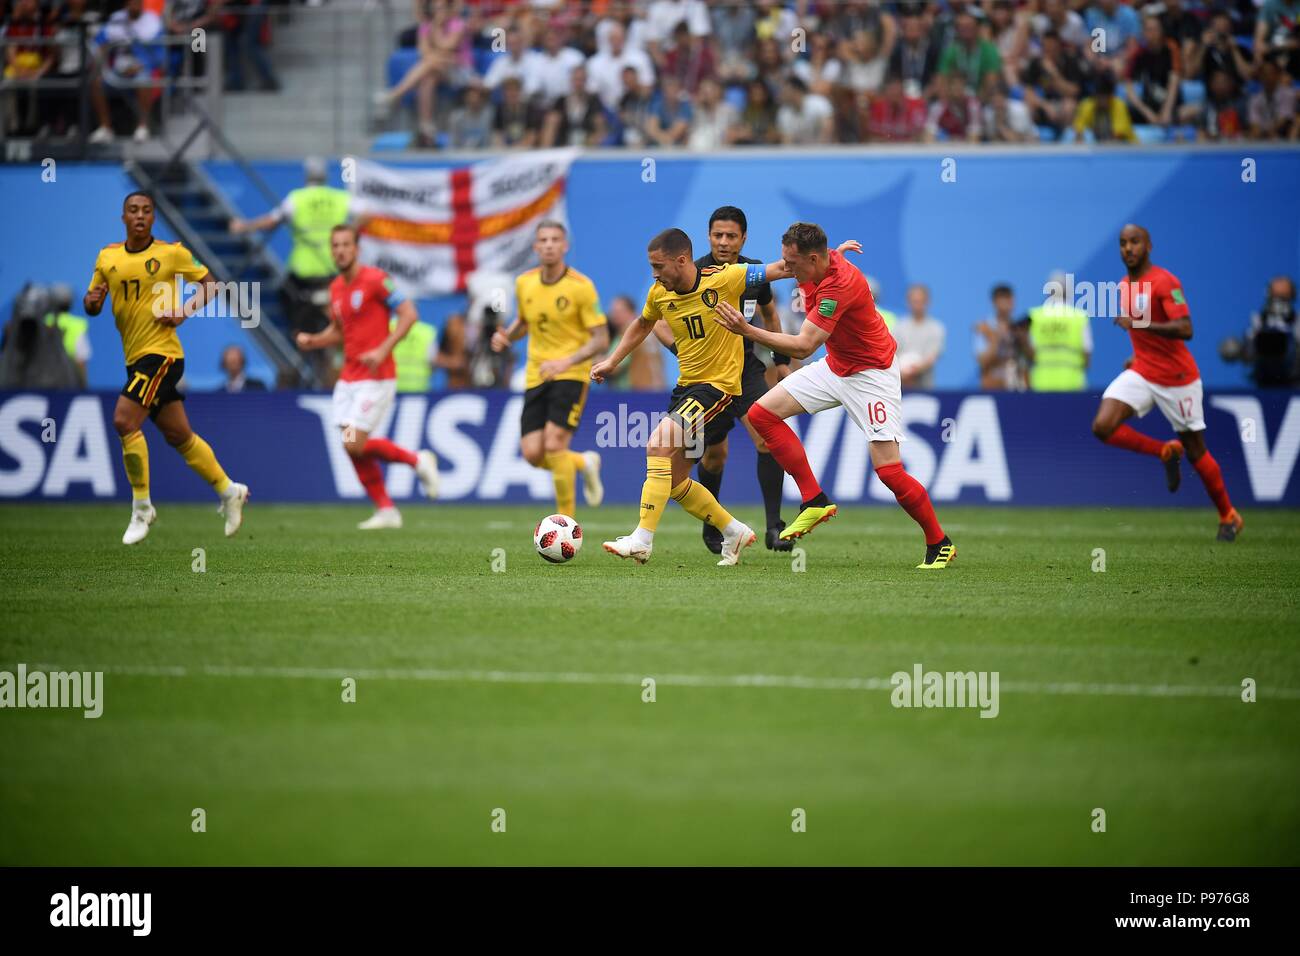 July 14th, 2018, St, Petersburg, Russia. Phil Jones (R) of England and Eden Hazard of Belgium compete for the ball during the 2018 FIFA World Cup Russia match between England and Belgium at Saint-Petersburg Stadium, Russia. Shoja Lak/Alamy Live News Stock Photo